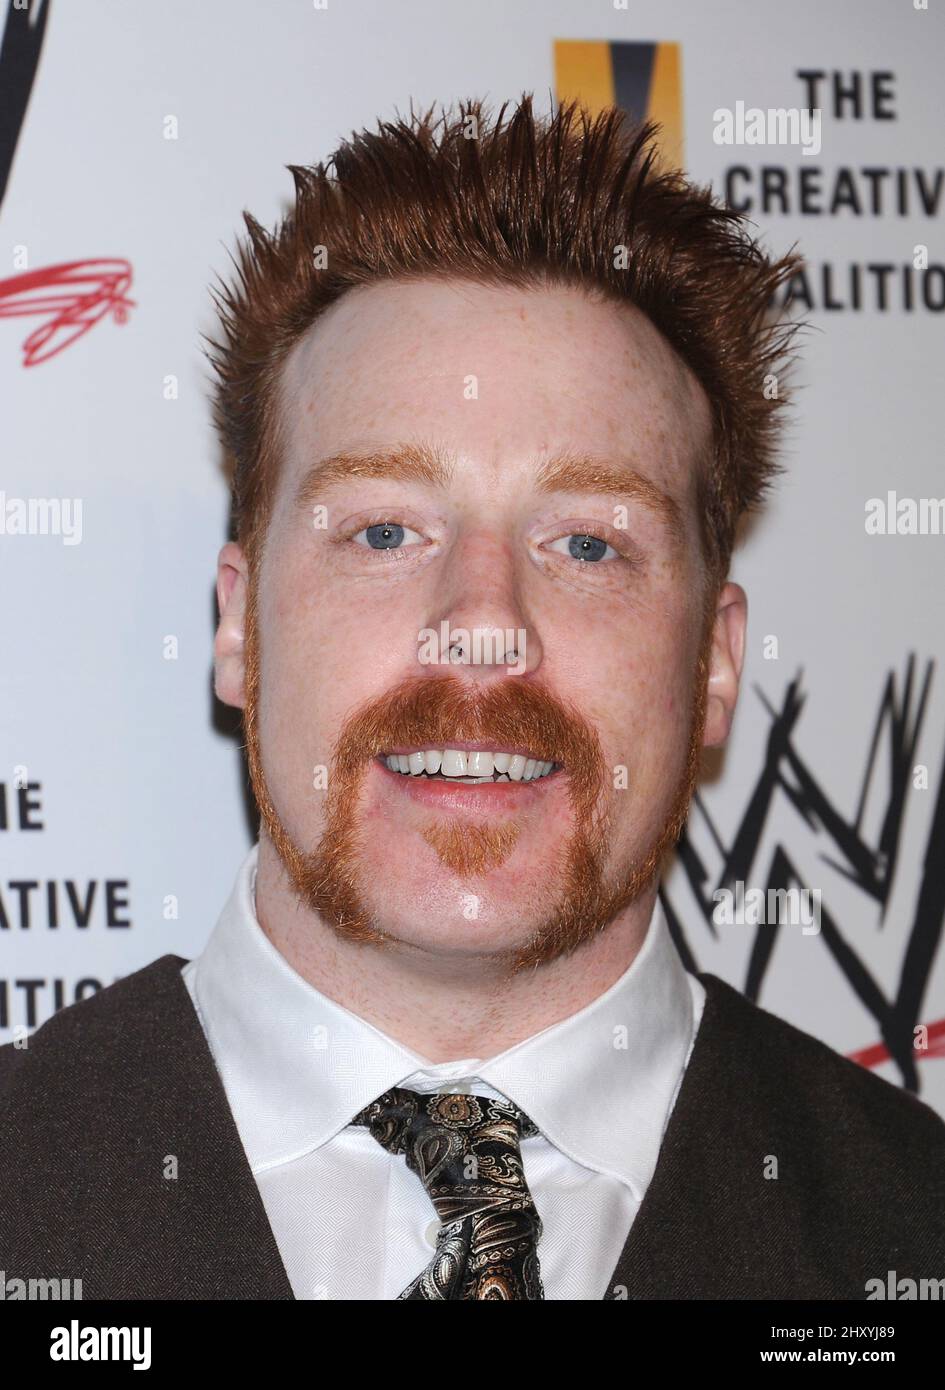 Sheamus attends the WWE SummerSlam VIP Kick-Off Party held at the ...